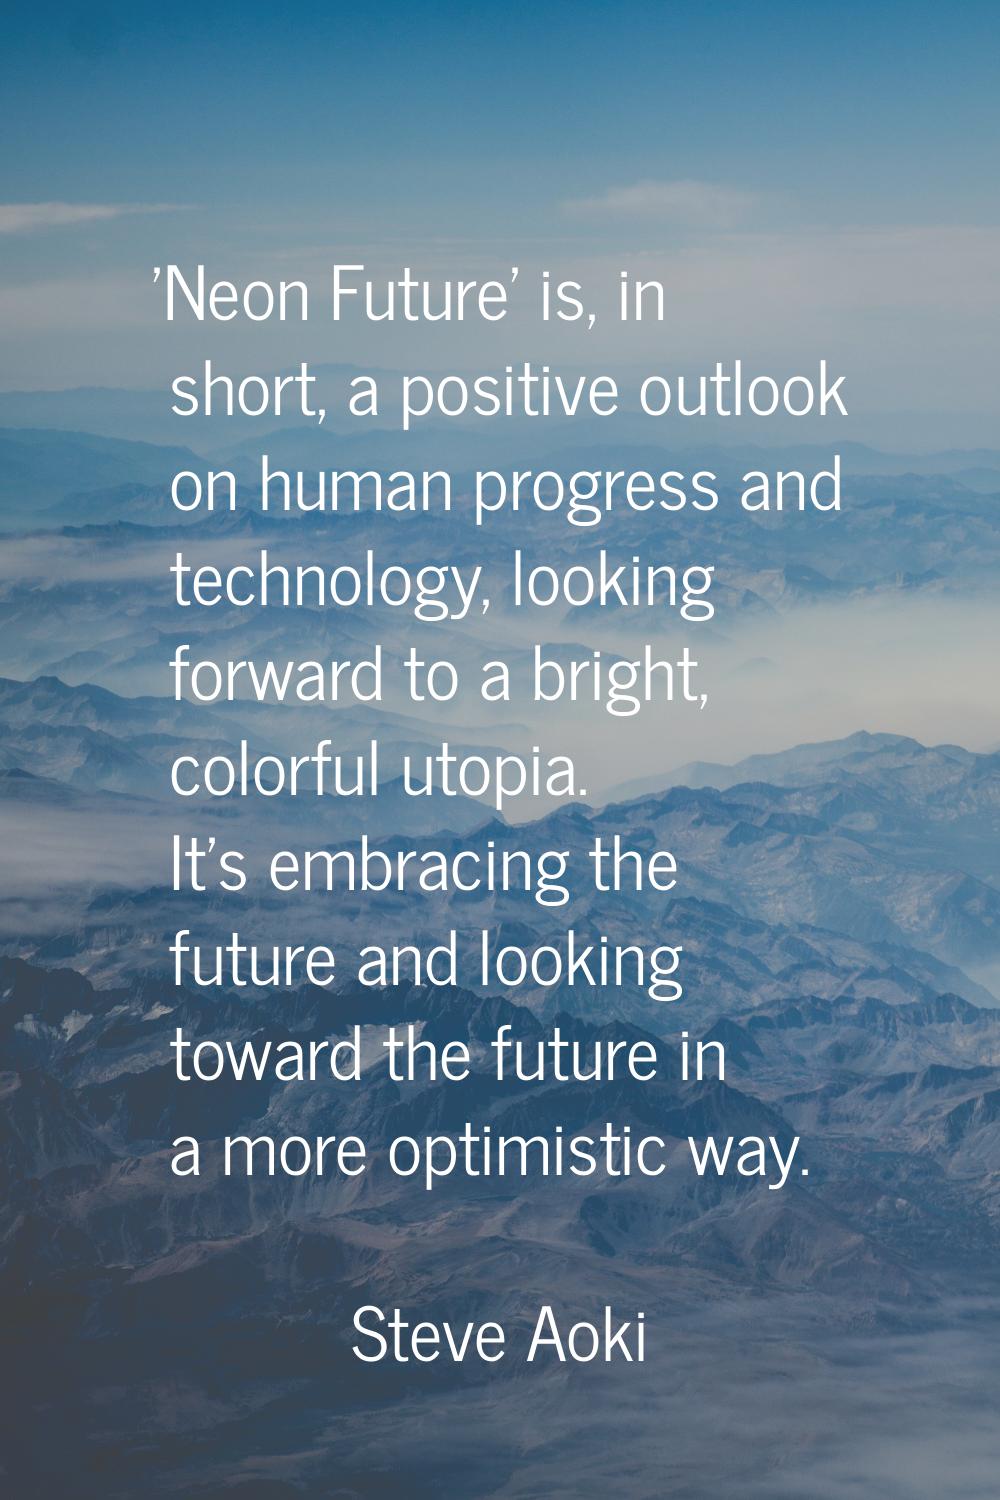 'Neon Future' is, in short, a positive outlook on human progress and technology, looking forward to